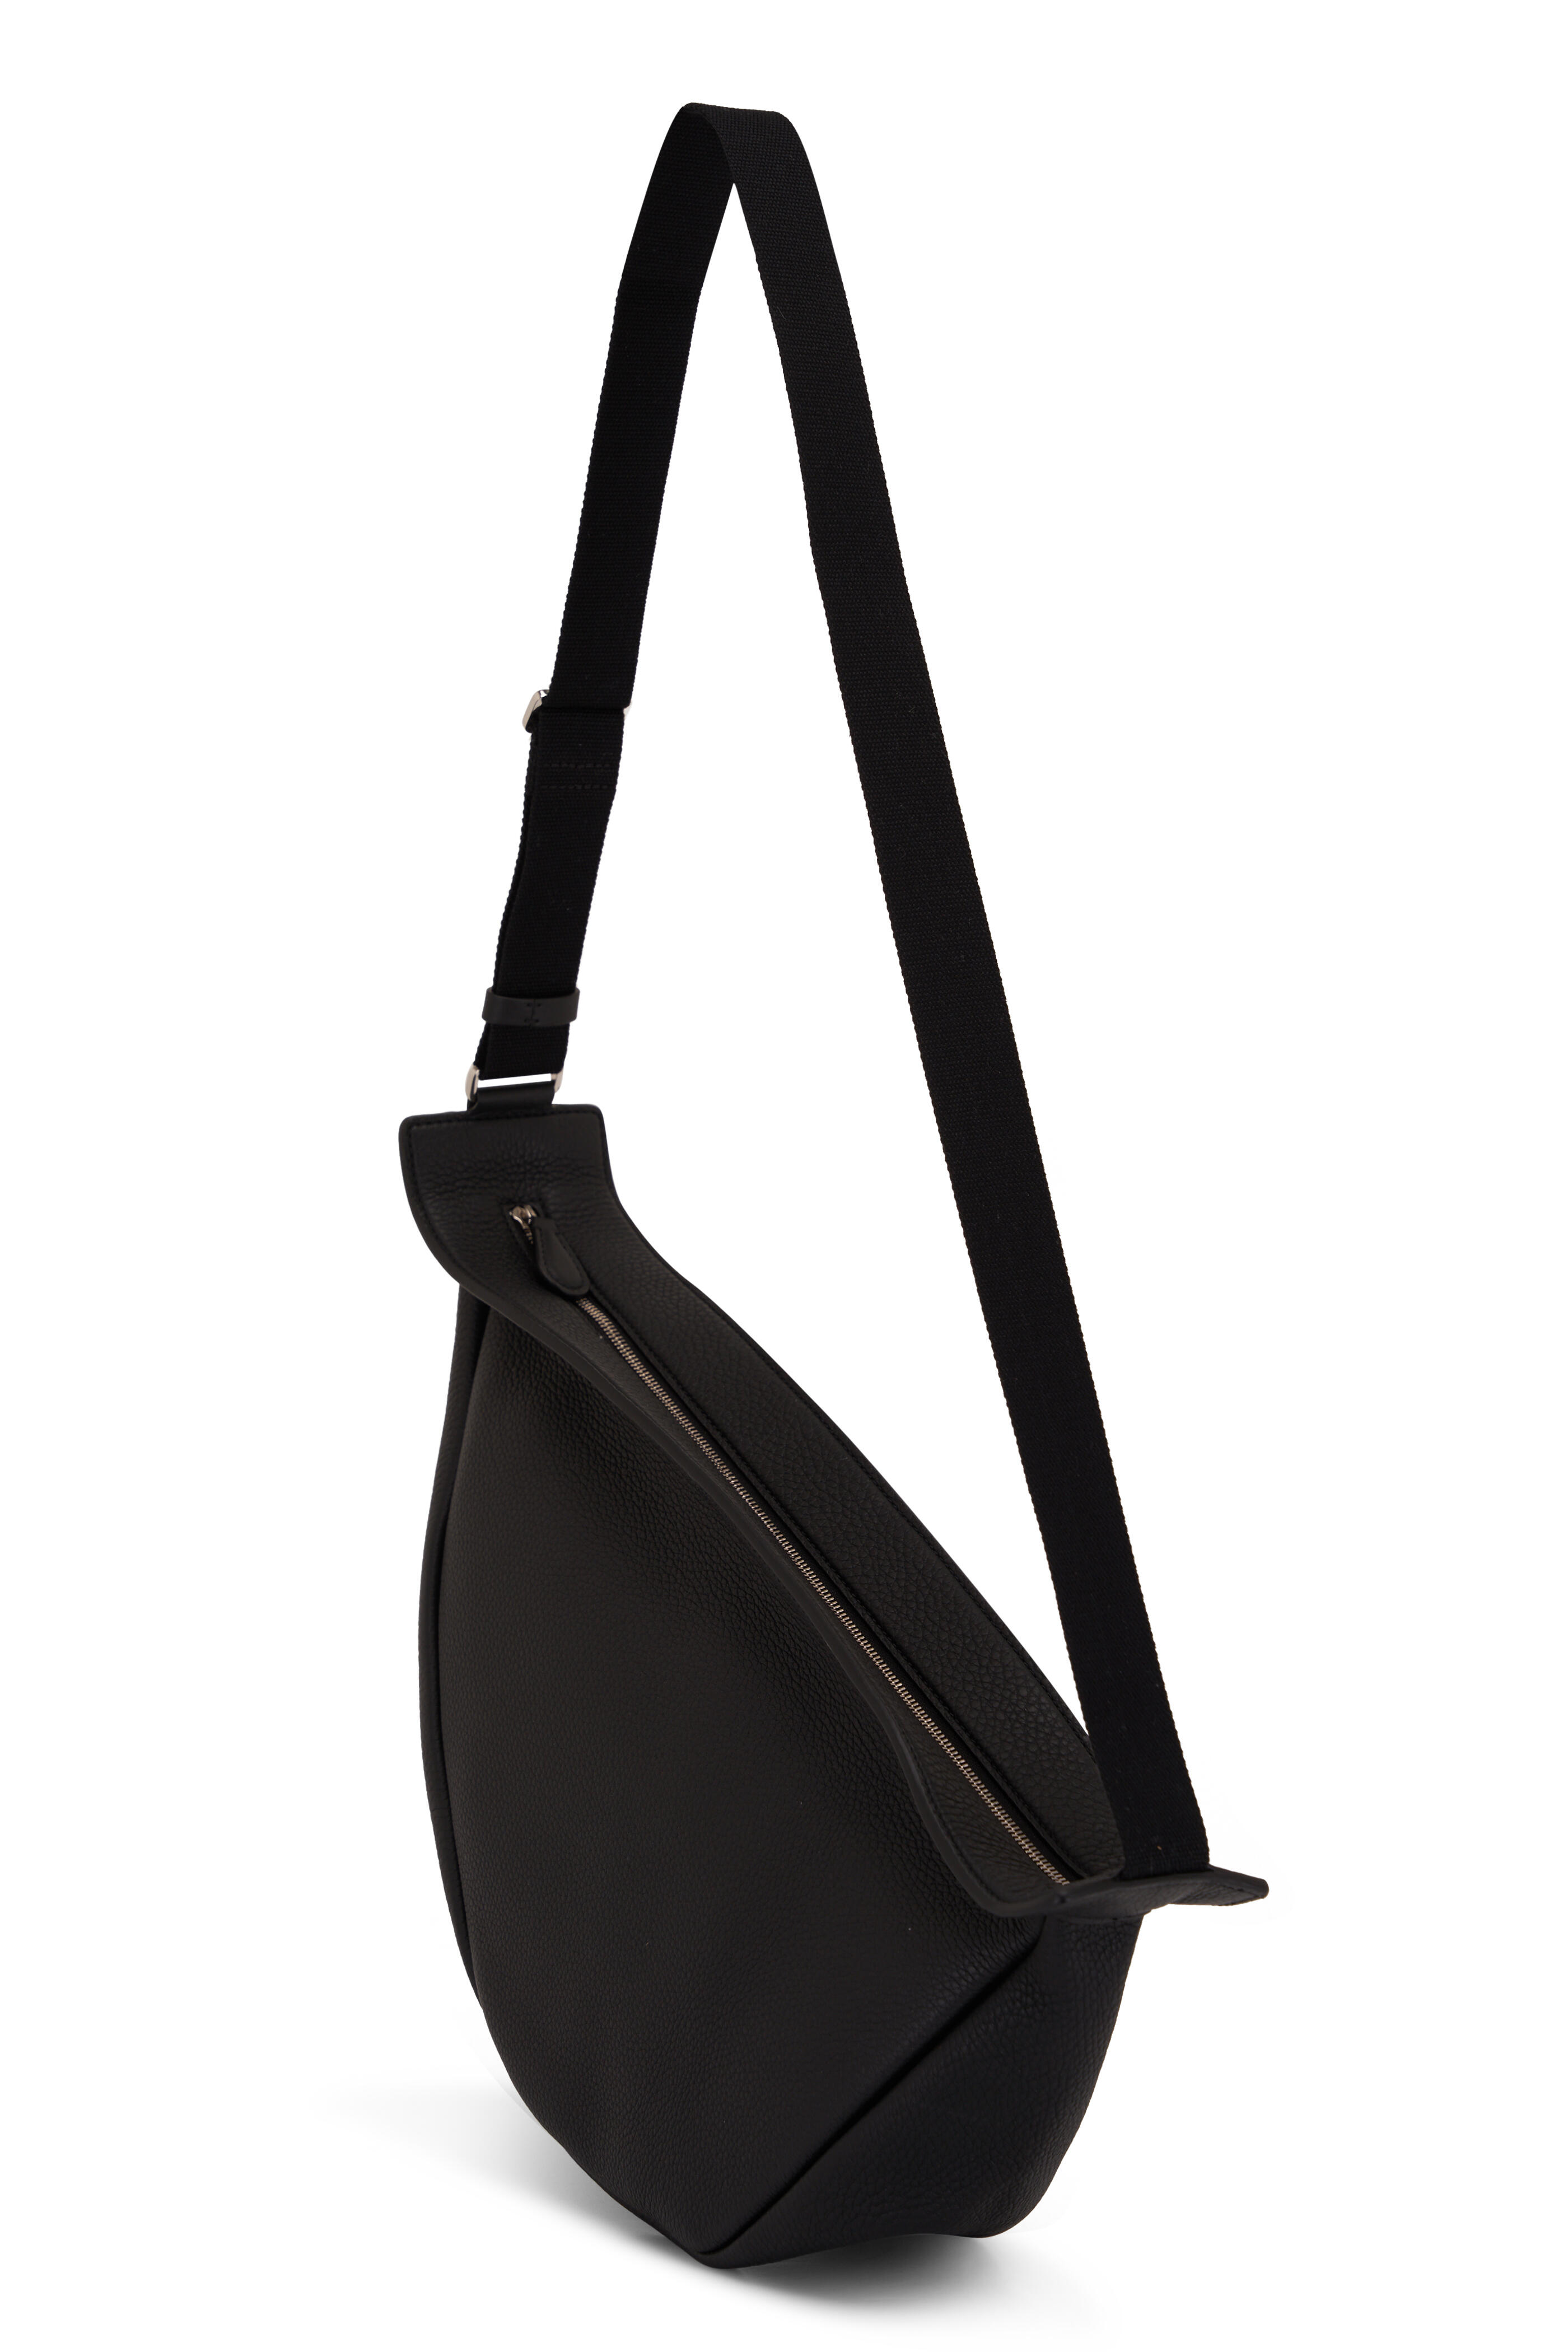 THE ROW Slouchy Banana leather shoulder bag